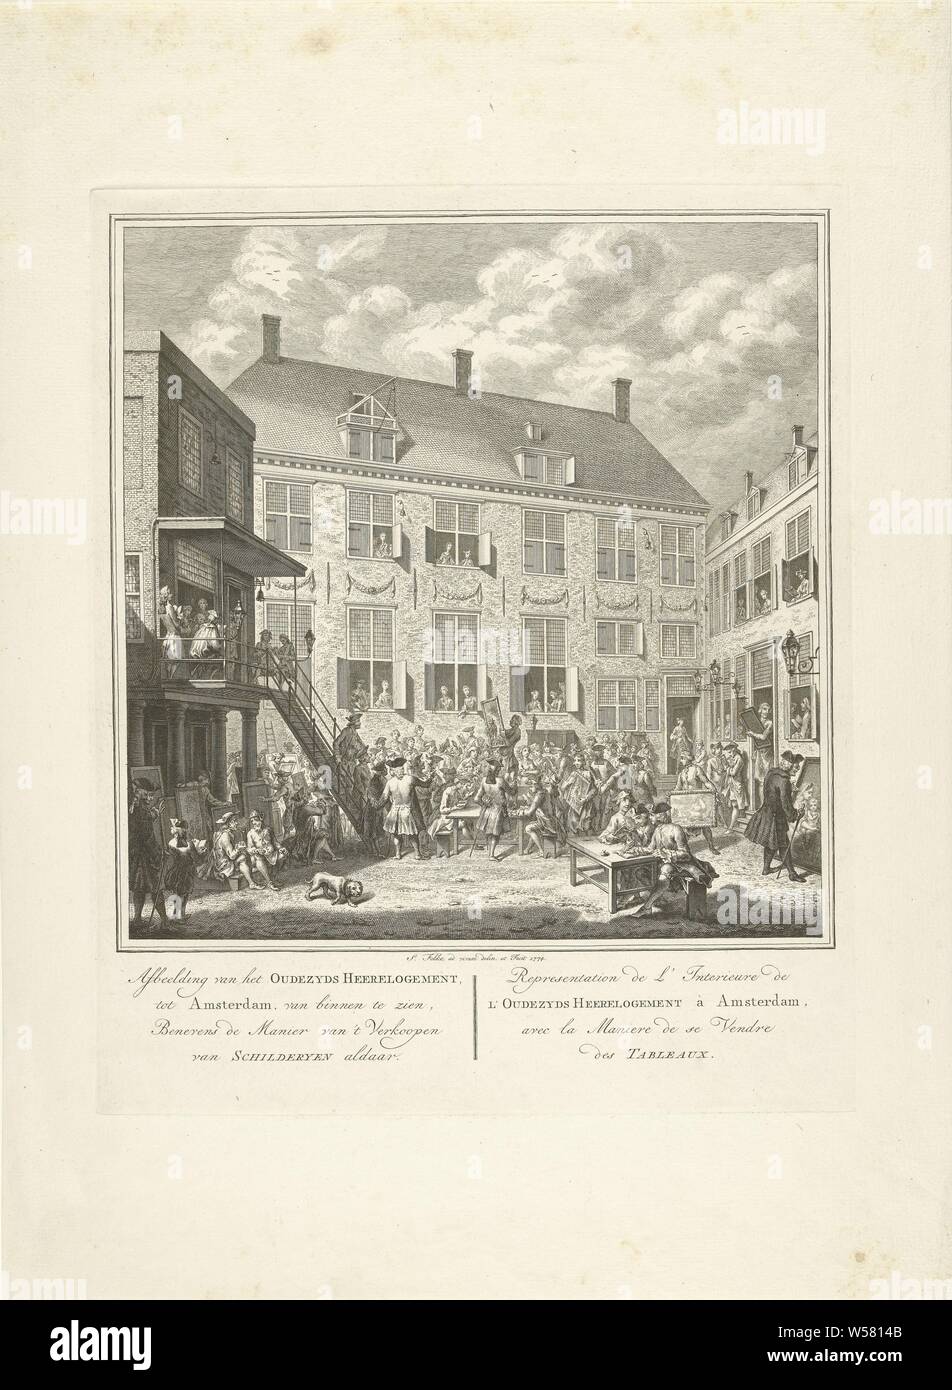 View of the Oudezijds Herenlogement in Amsterdam and a painting sale, 1773 Print of the Oudezyds Heerelogement, until Amsterdam, seen from inside, In addition to the Way of Selling Schilderyen there / Representation de l ' Interieure de l'Oudezyds Herenlogement, à Amsterdam, avec la Maniere de se Vendre des Tableaux (title on object), View of the courtyard of the Oudezijds Herenlogement in Amsterdam where a painting sale takes place. Probably it concerns the public sale or auction of the collection of paintings of Leiden mayor Johan van der Markt Aegidsz, who died in 1772. on 25 August 1773 Stock Photo